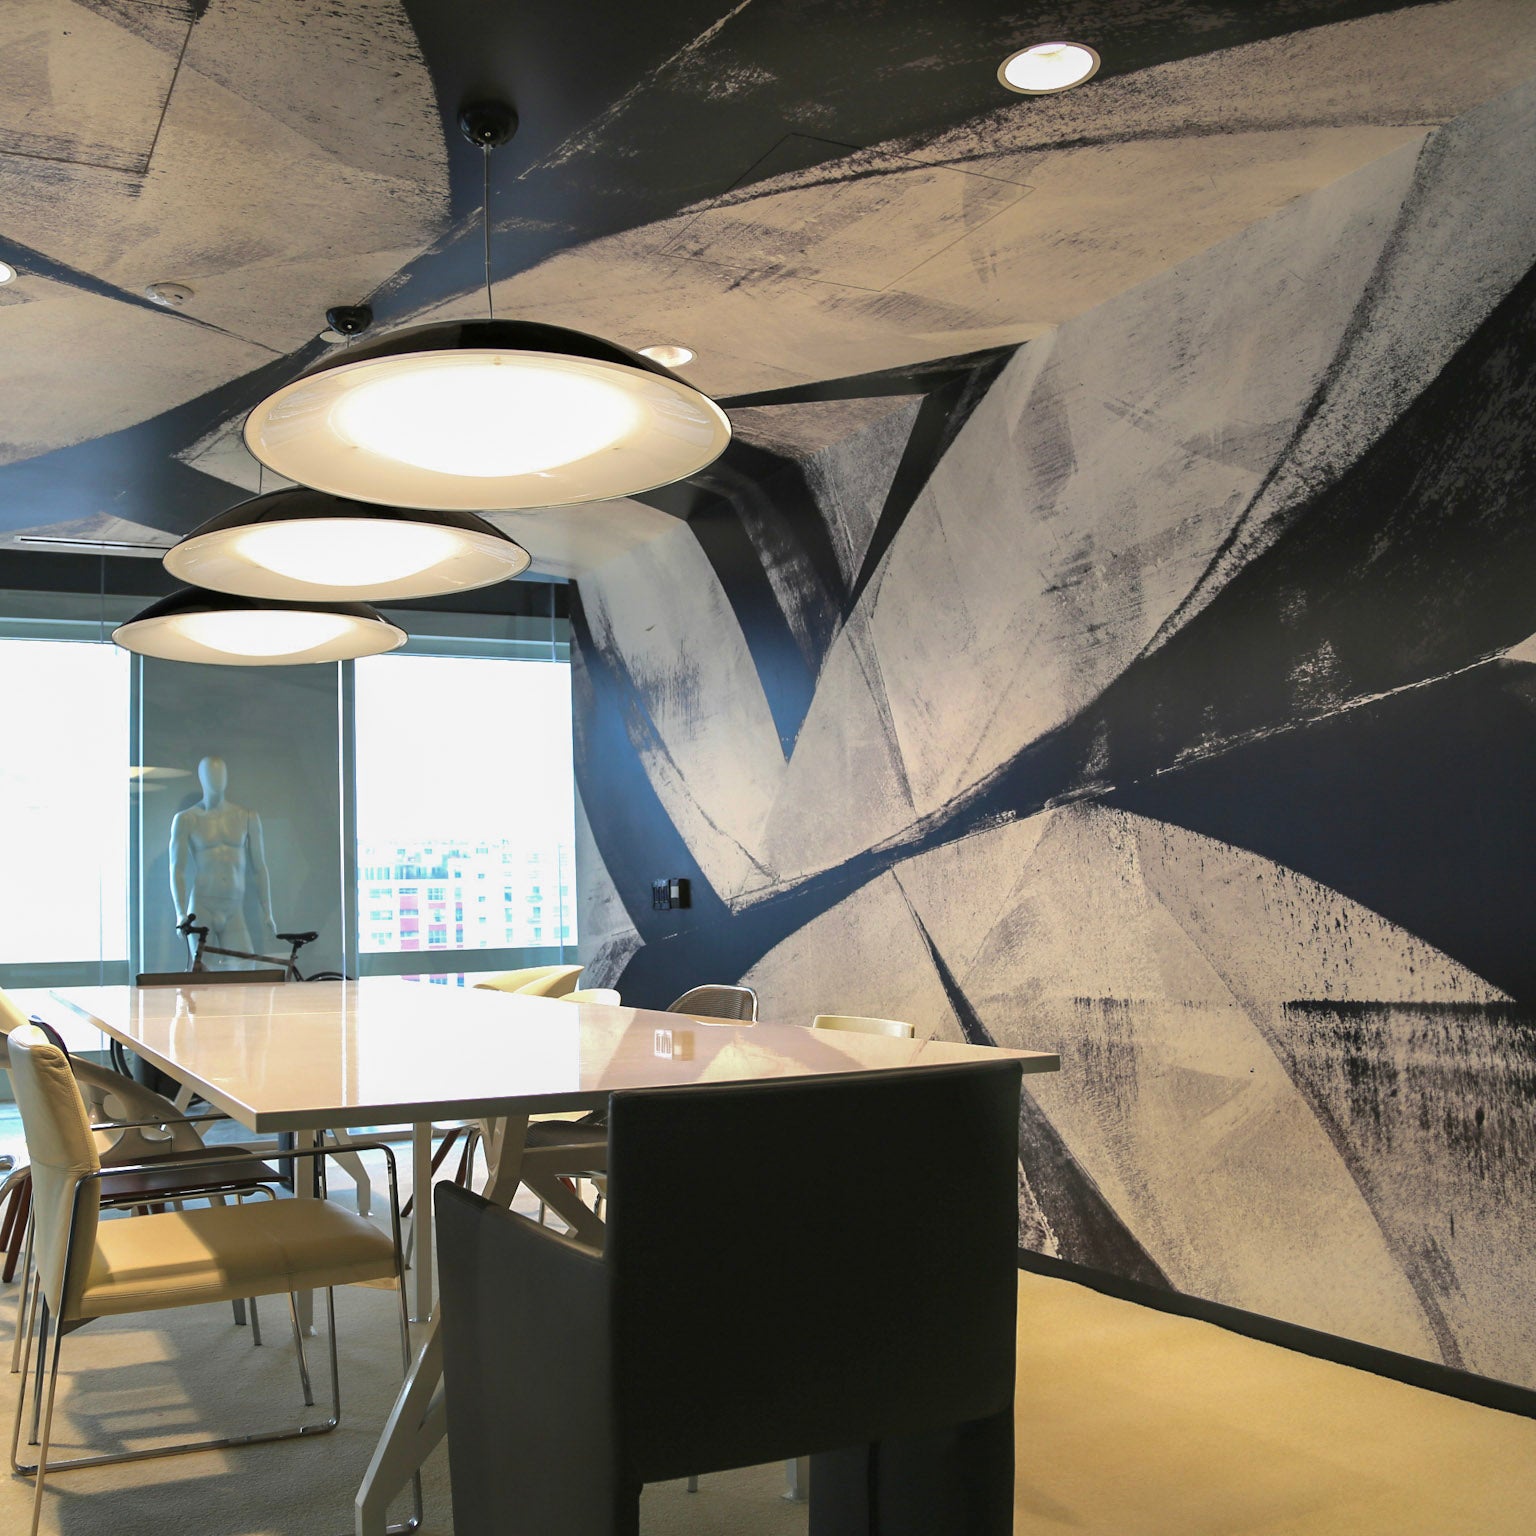 A modern meeting room at Brookfield Design Hive with floor-to-ceiling glass walls, featuring a dramatic black-and-white mural by WRAPPED Studio, fostering a creative workspace ambiance.